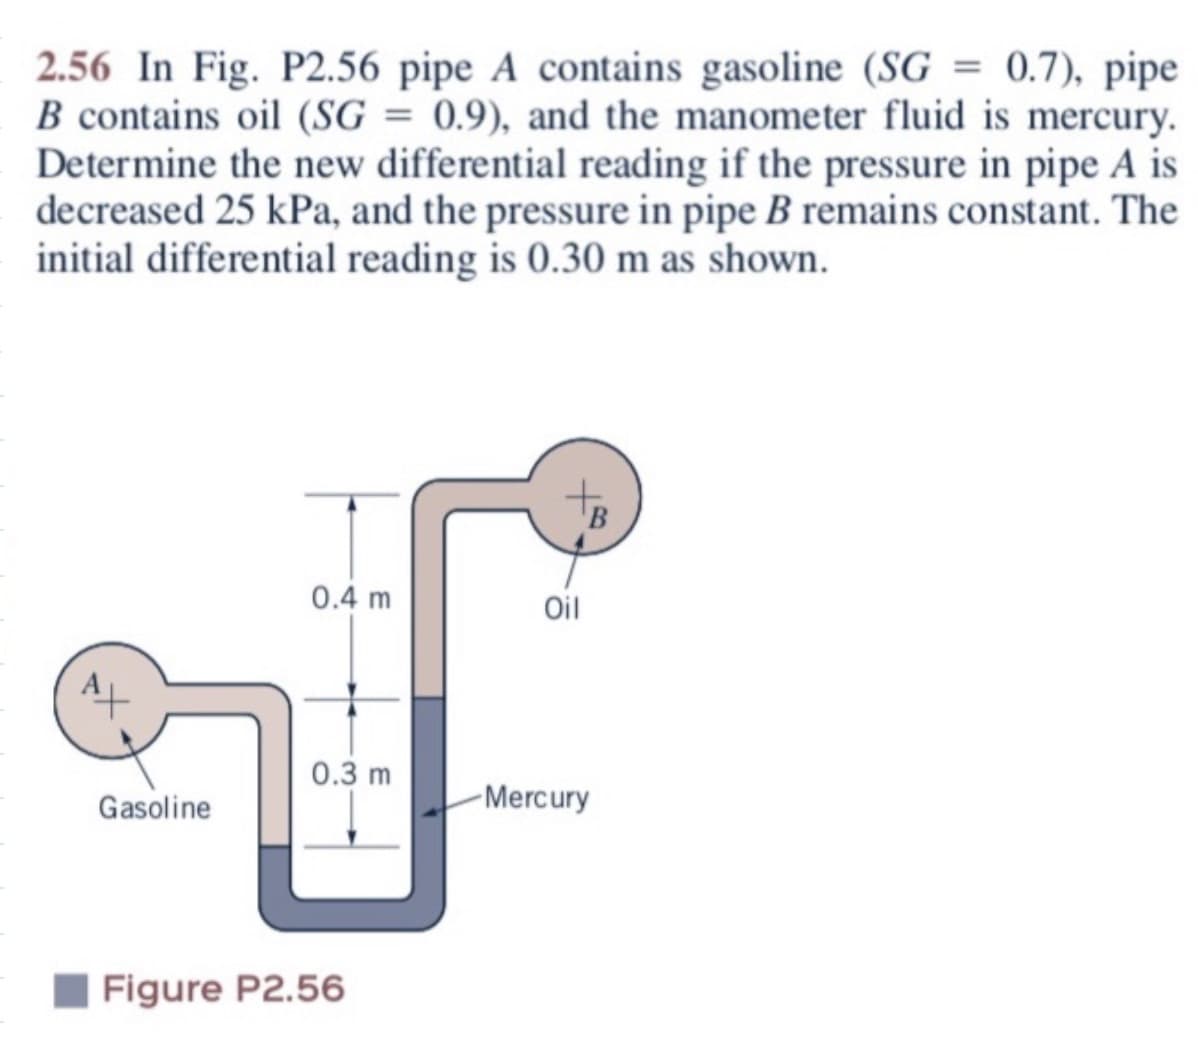 2.56 In Fig. P2.56 pipe A contains gasoline (SG = 0.7), pipe
B contains oil (SG = 0.9), and the manometer fluid is mercury
Determine the new differential reading if the pressure in pipe A is
decreased 25 kPa, and the pressure in pipe B remains constant. The
initial differential reading is 0.30 m as shown
B
0.4 m
Oil
0.3 m
Mercury
Gasoline
Figure P2.56
